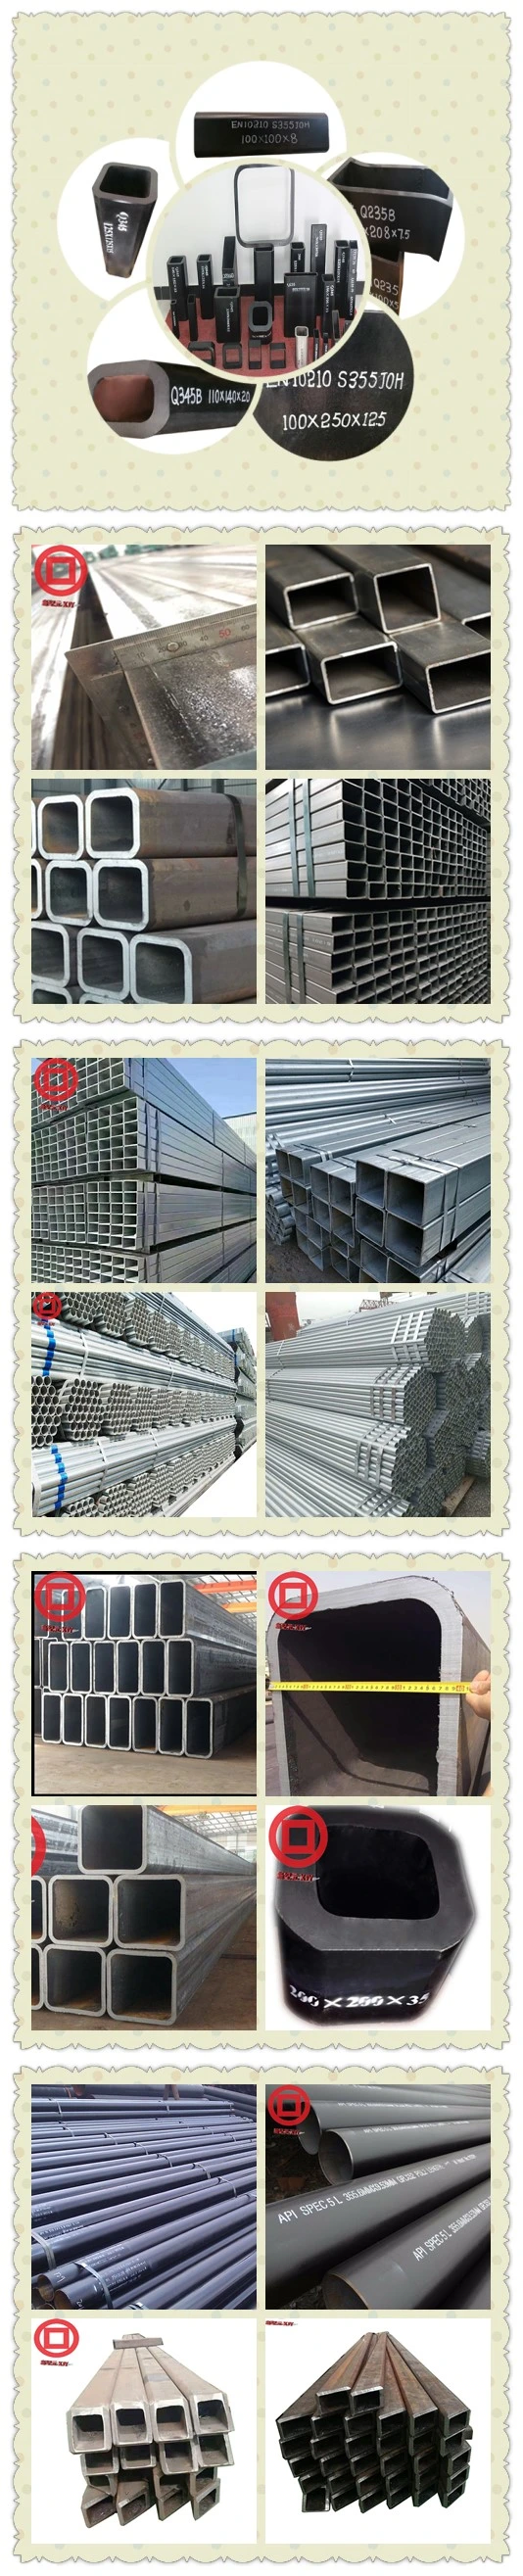 Large Diameter Corrugated Steel Culvert, Hollow Section/Shs/Rhs Hot Dipped Galvanized Steel Square Pipe